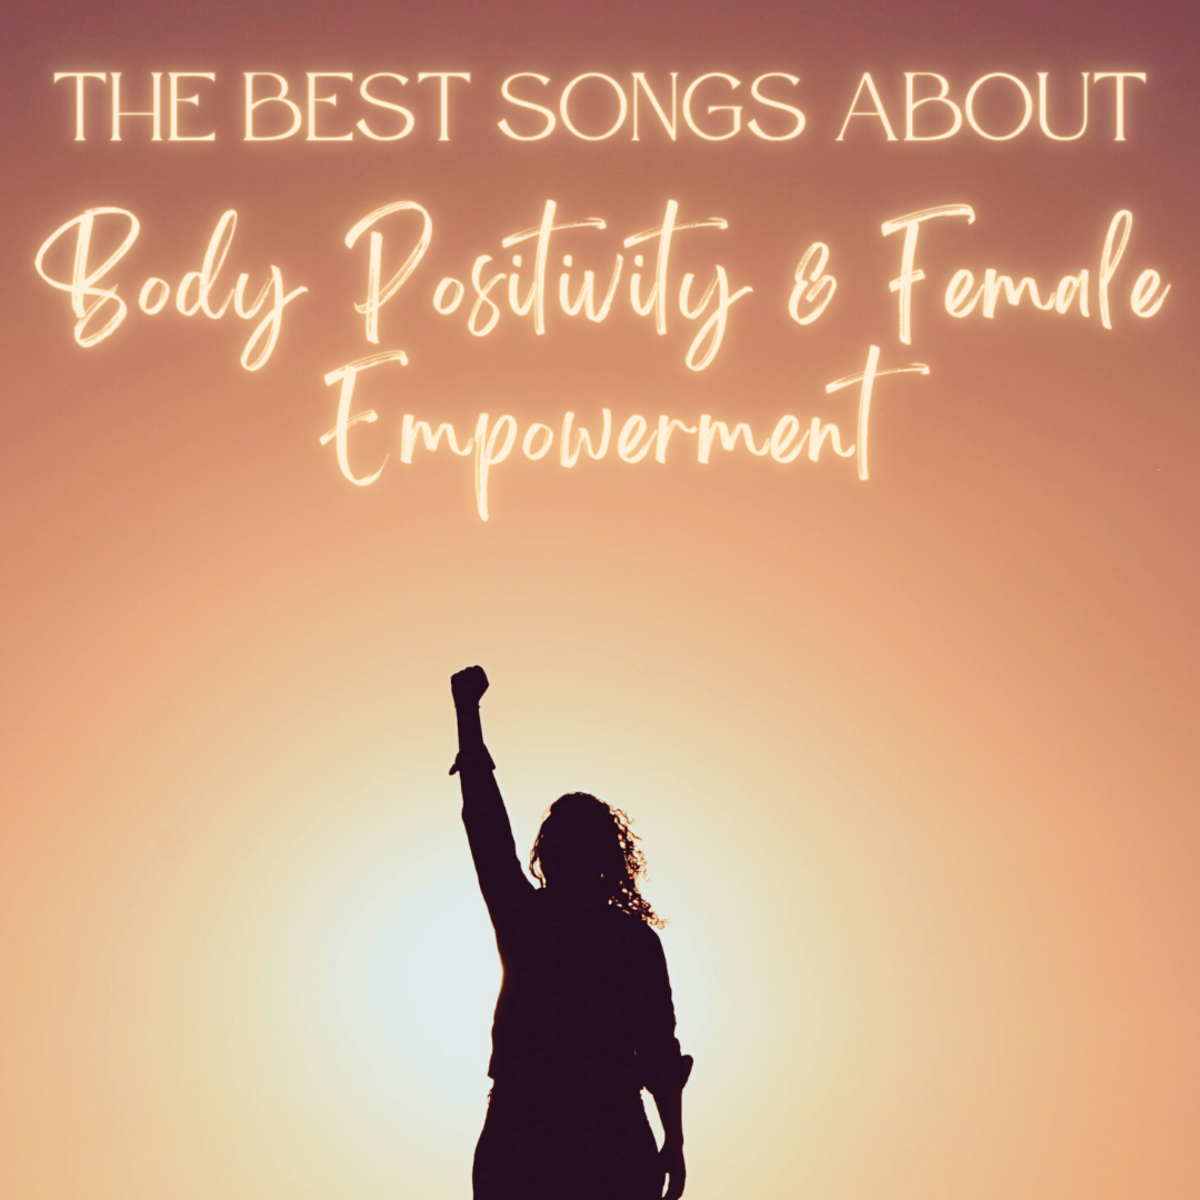 Top 17 Hit Songs About Body Positivity, Self-Love, and Female Empowerment